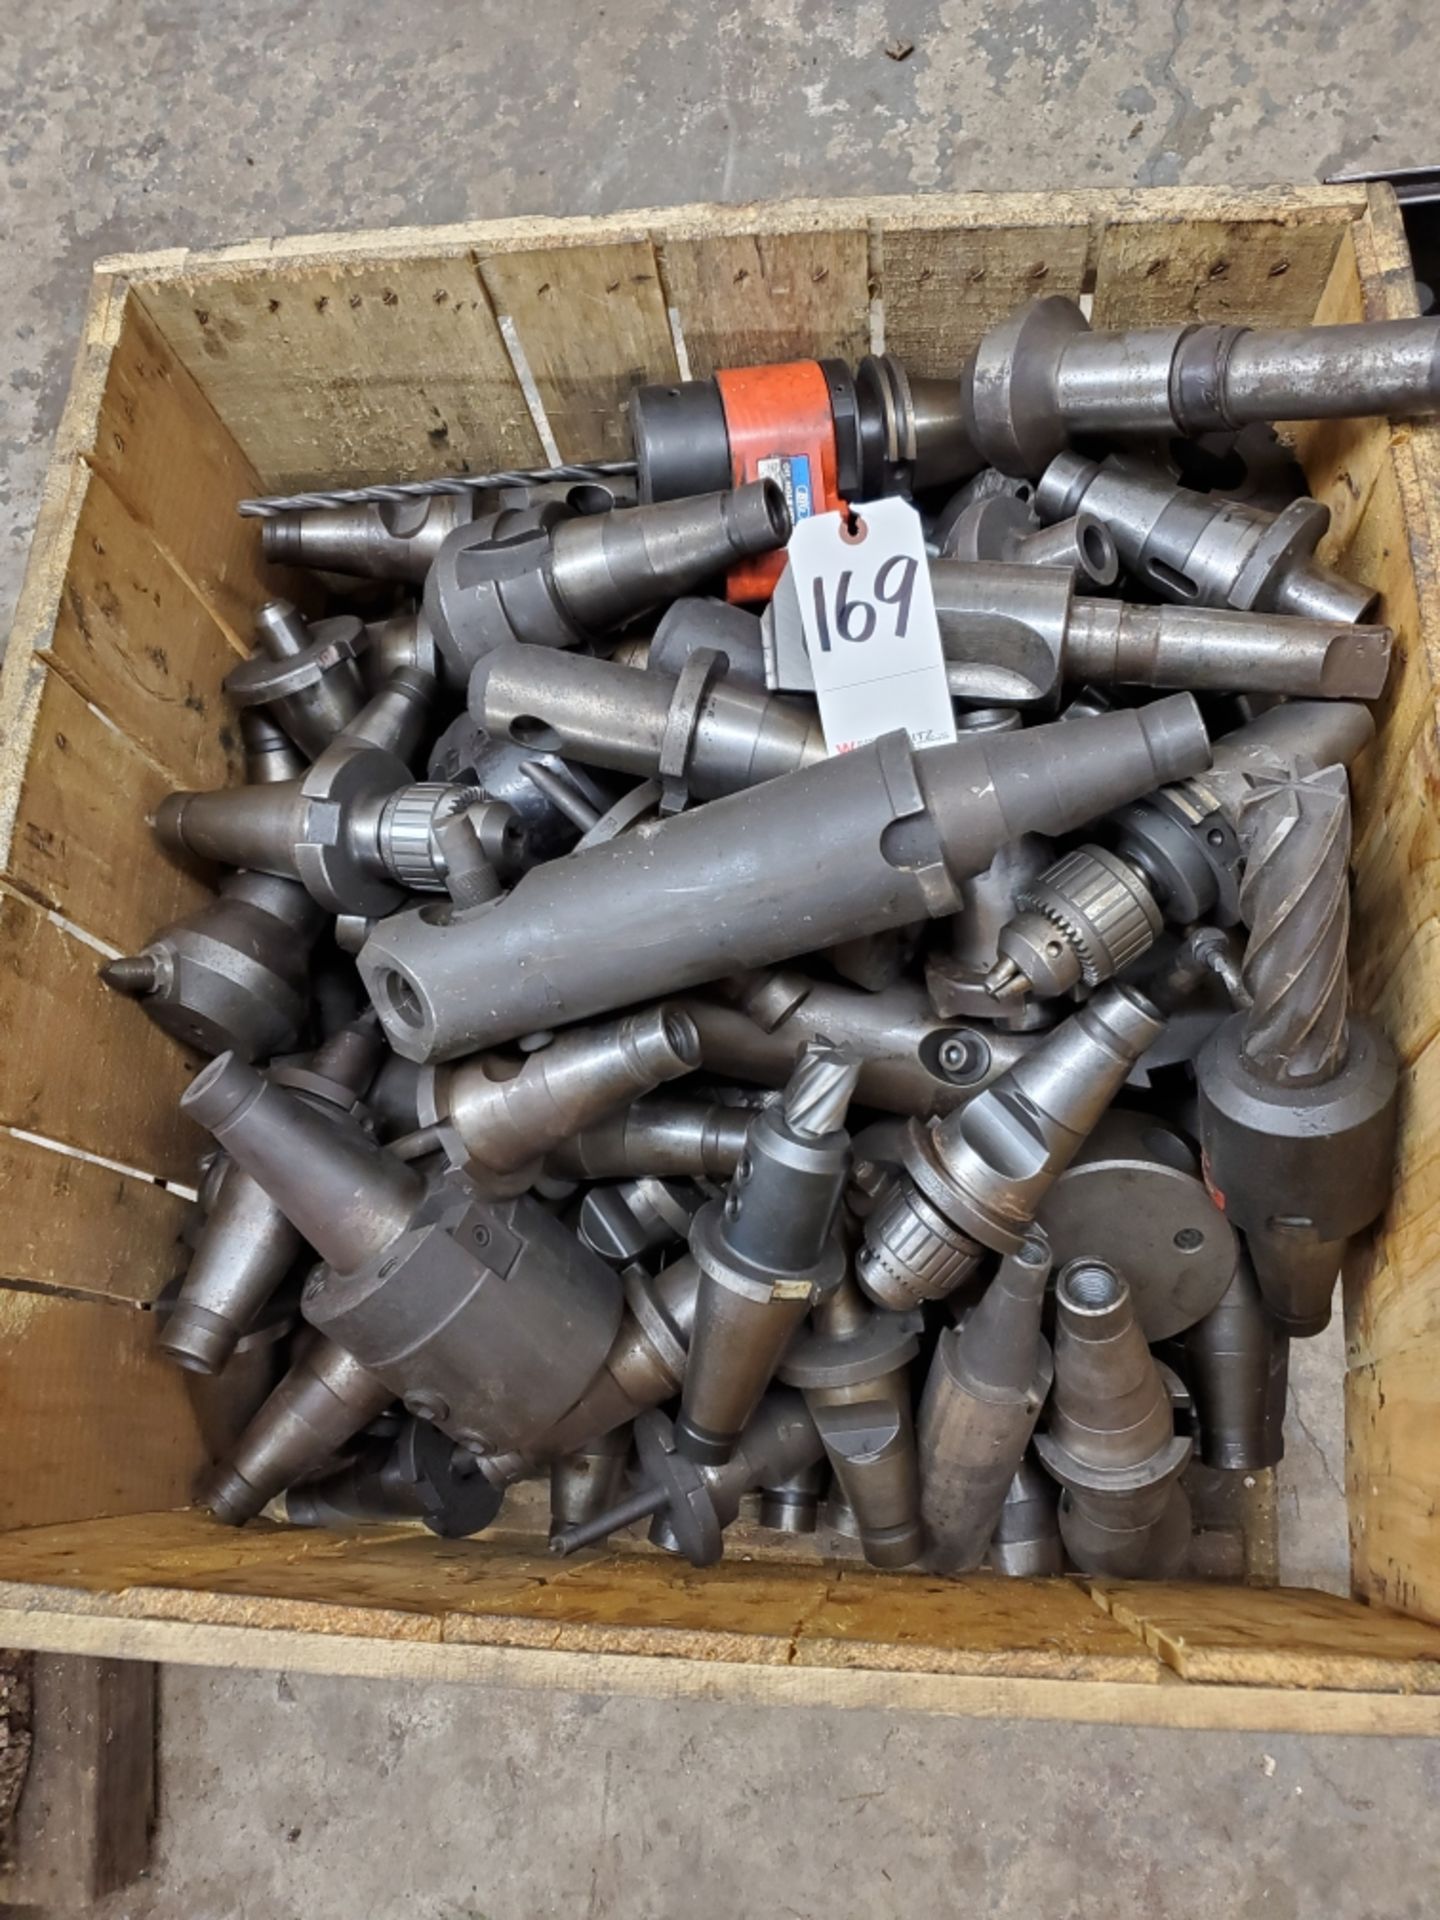 LOT ASSORTED DEVLIEG TOOLING IN (2) CRATES